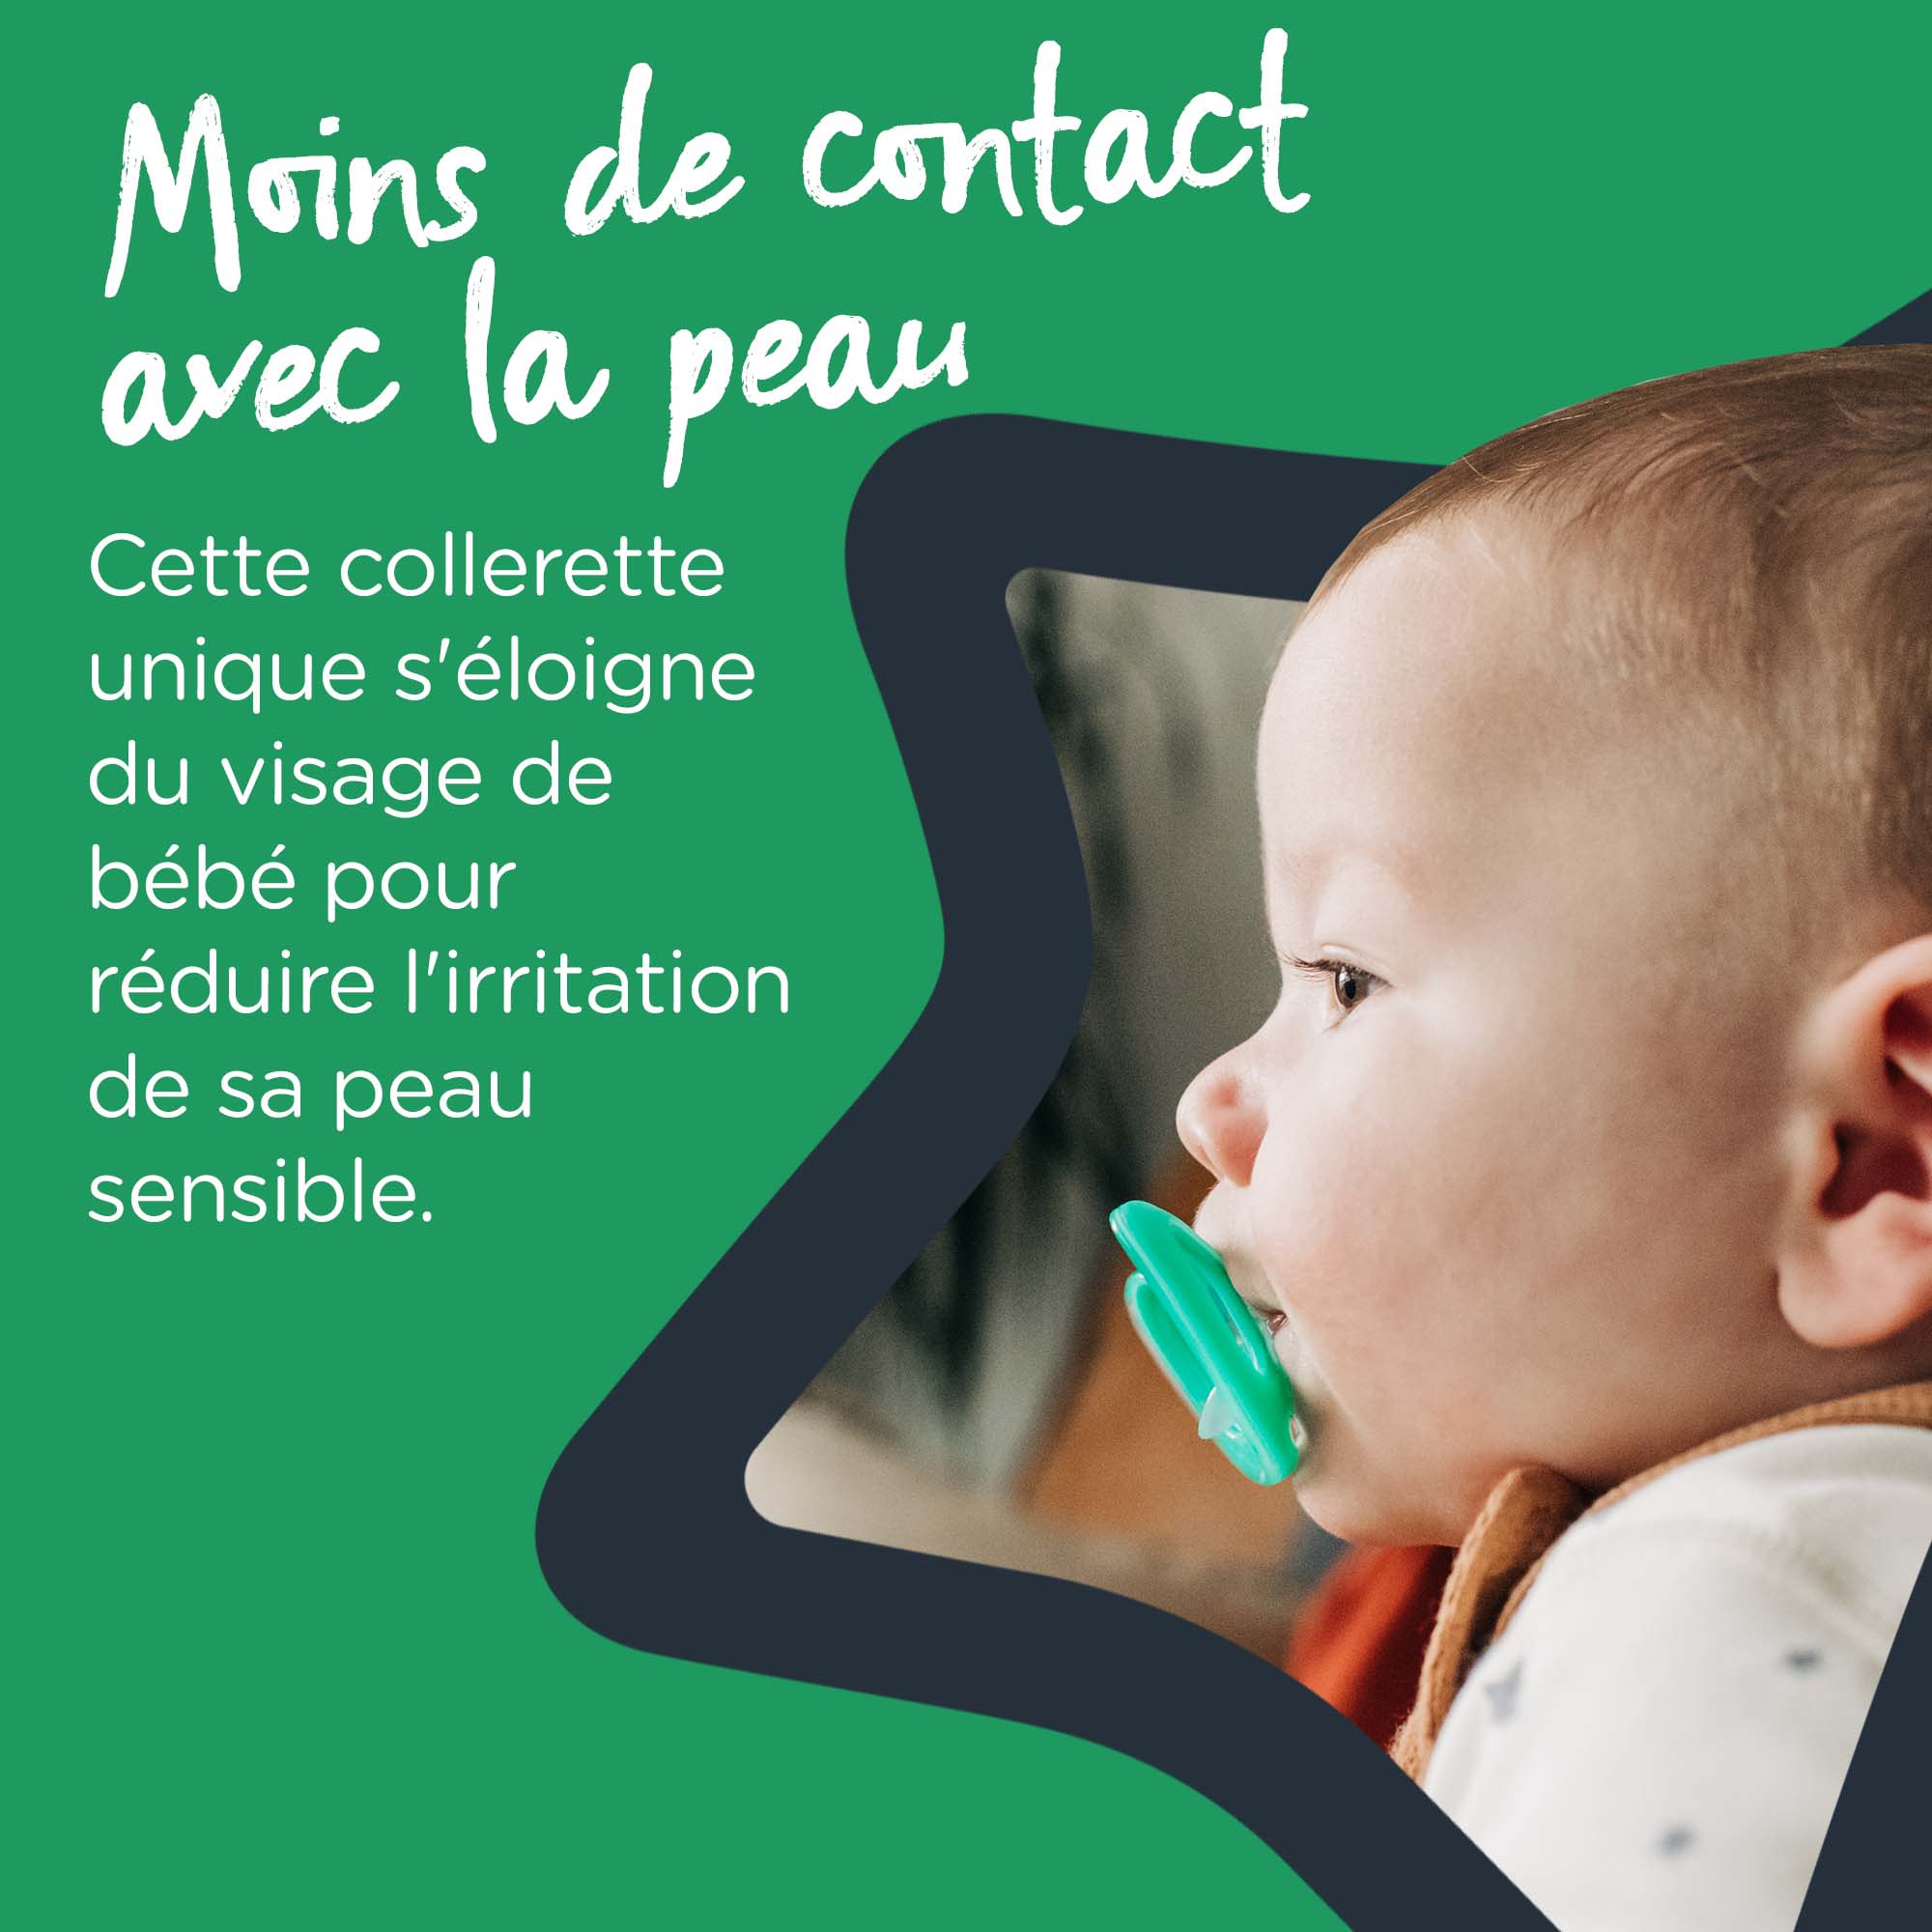 Tommee tippee sucette ctn - sensitive x2 6-18m mois TOMMEE TIPPEE Pas Cher  